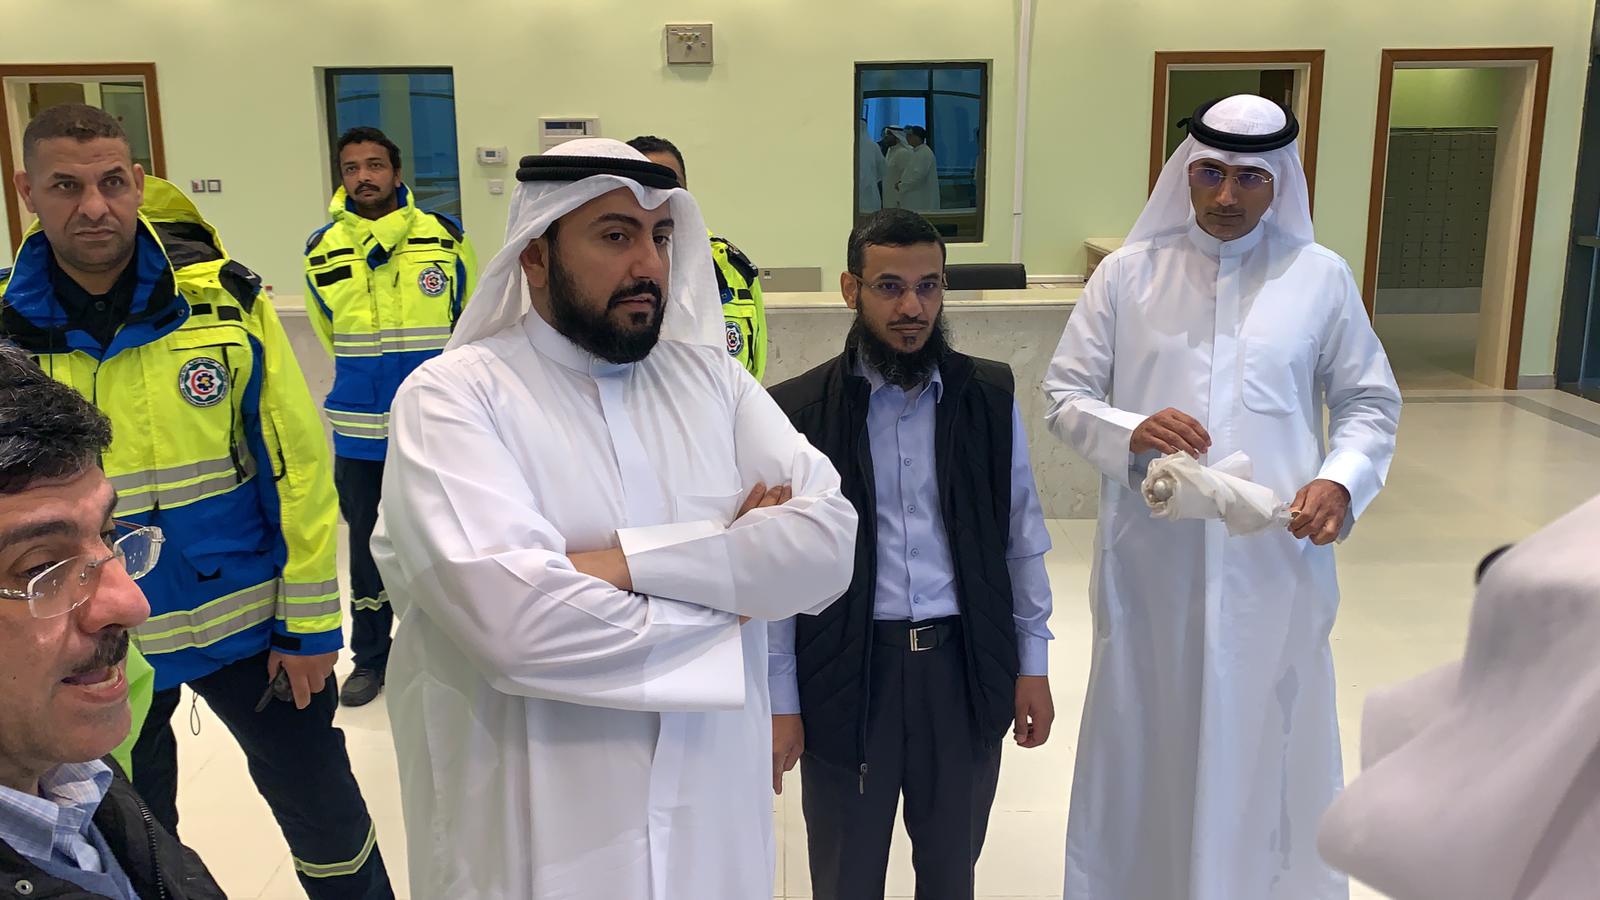 Kuwaiti Minister of Health Sheikh Dr. Basel Al-Sabah, accompanied by the ministry's Undersecretary Dr. Mustafa Reda paid tour visits Wednesday to the Amiri hospital and Sabah Al-Ahmad's emergency center